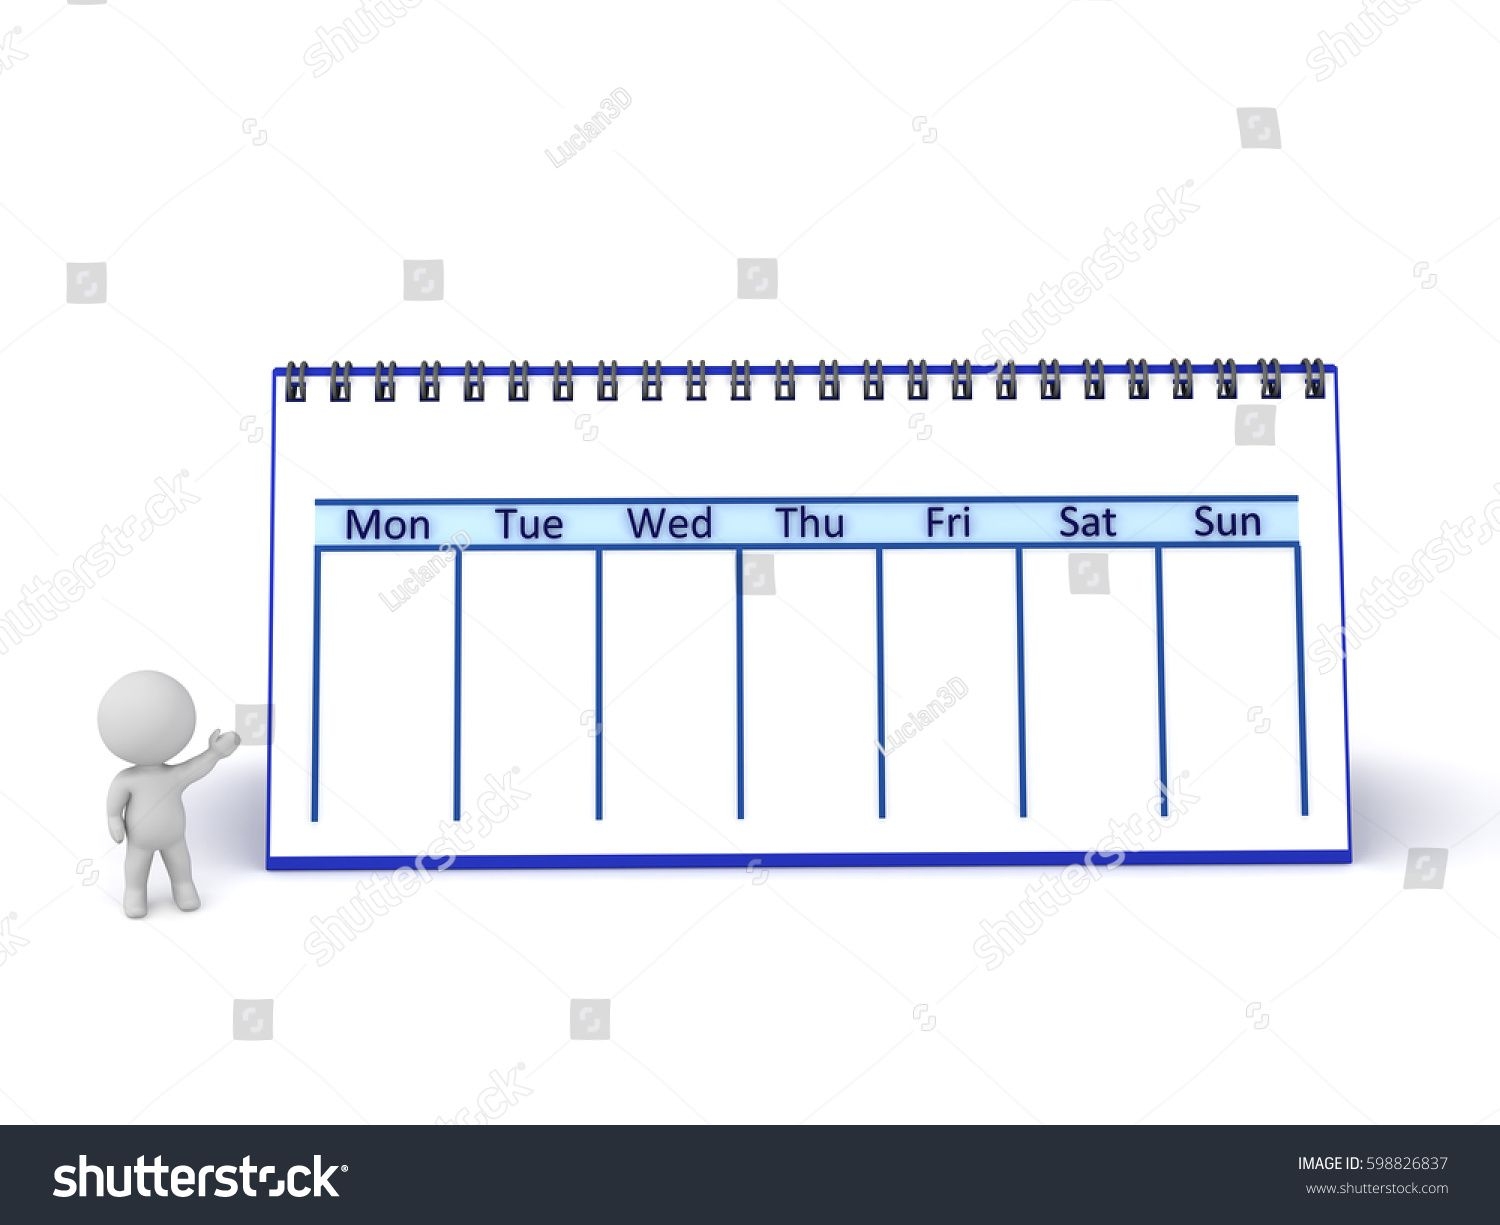 3D Character Large Calendar Showing One Stock Illustration